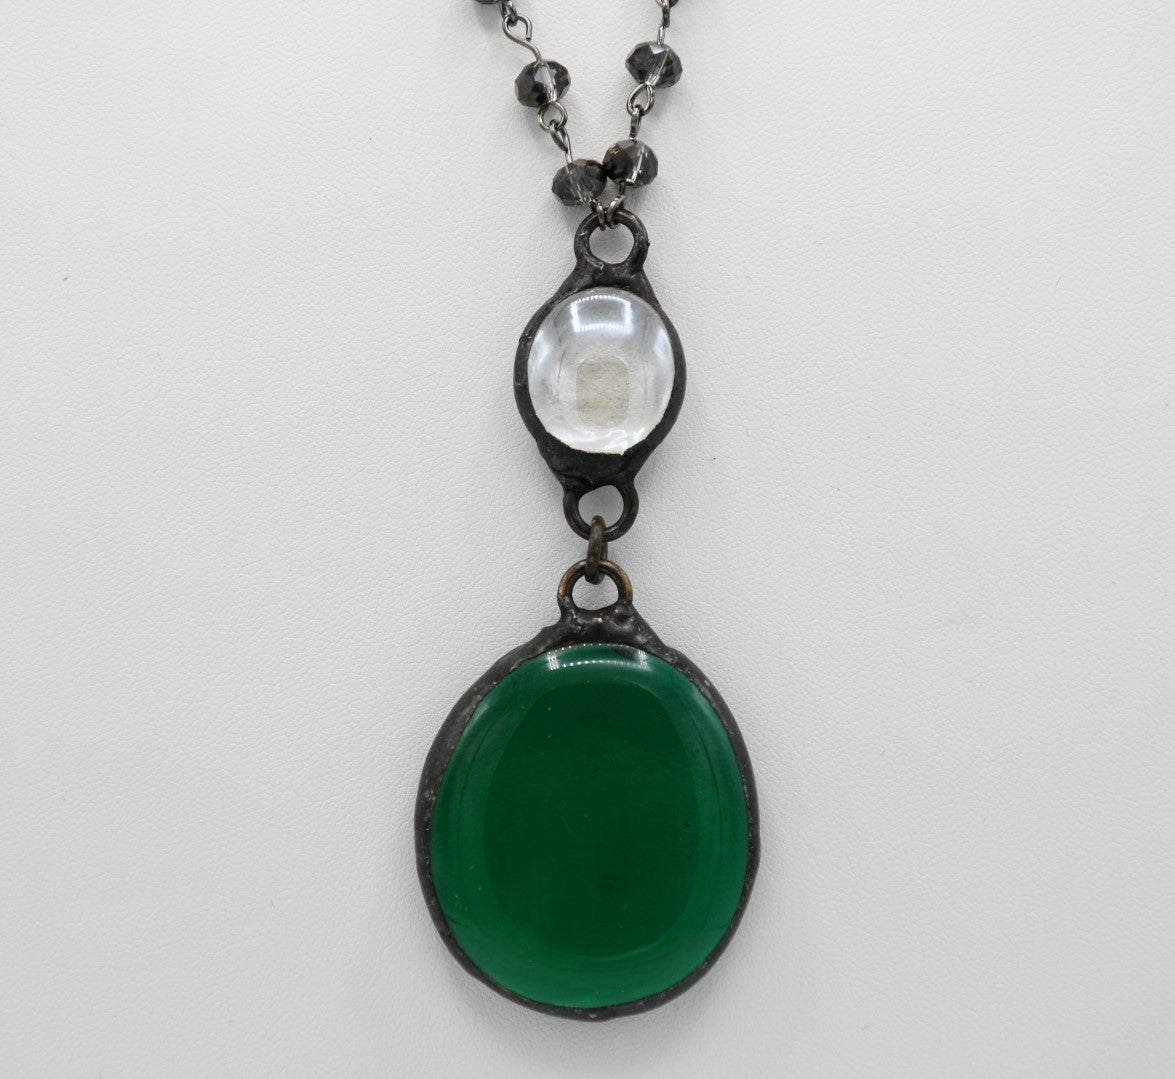 Emerald Green and clear glass soldered necklace